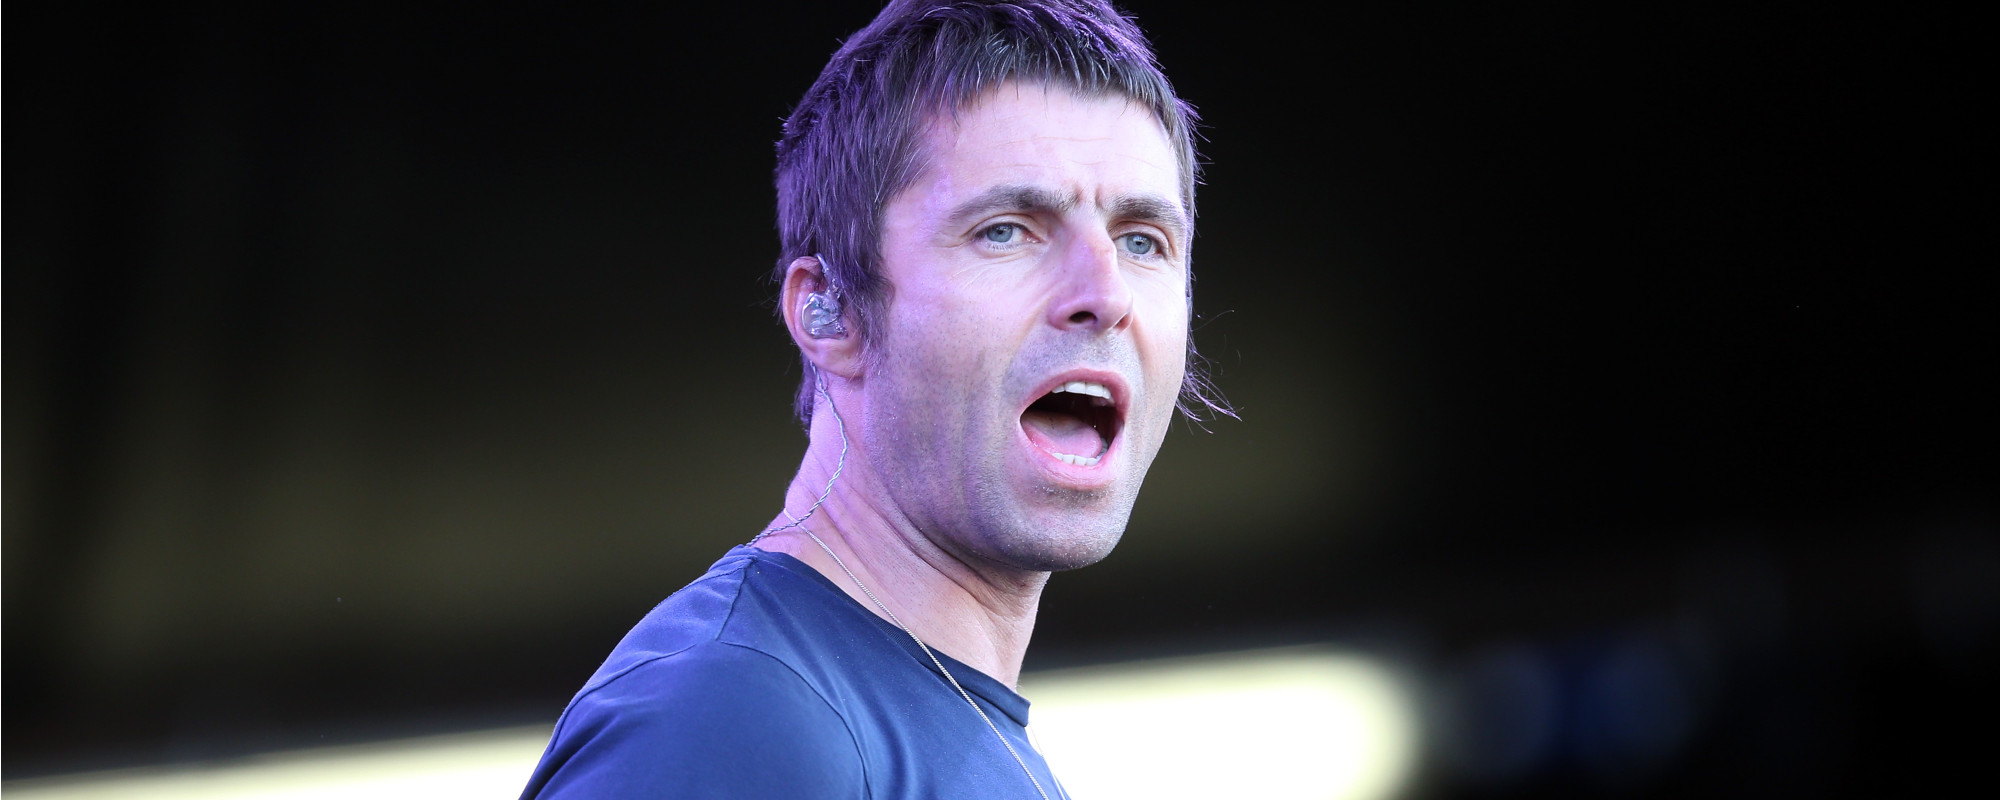 Liam Gallagher Calls Out Rock & Roll Hall of Fame: “As Much as I Love Mariah Carey, Do Me a Favour And F–k Off”